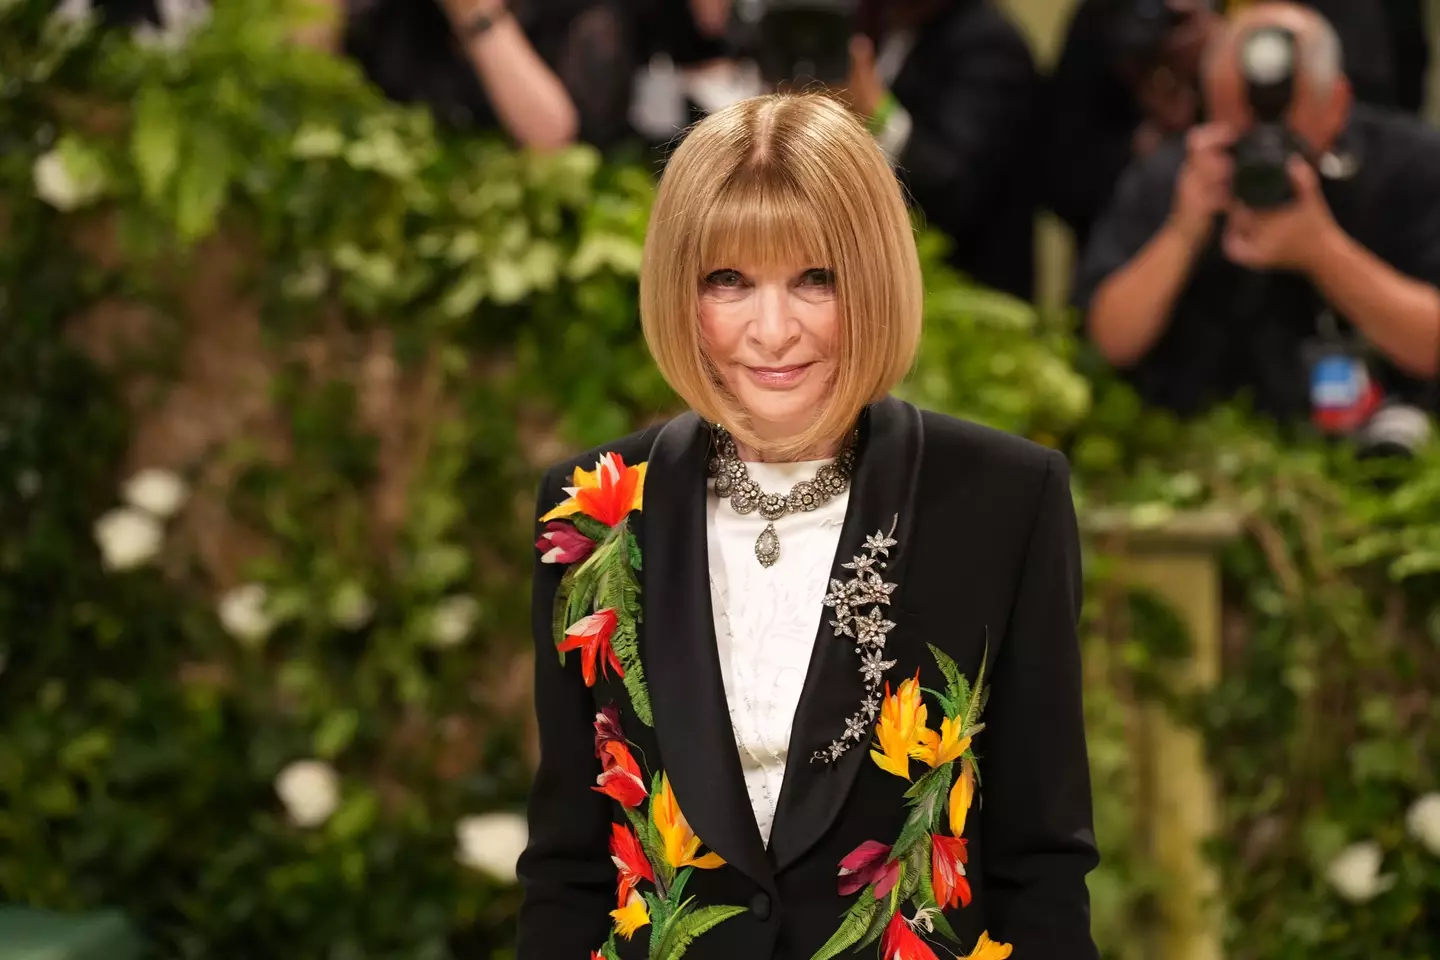 Anna Wintour has long hosted the Met Gala. (Sean Zanni/Patrick McMullan via Getty Images)